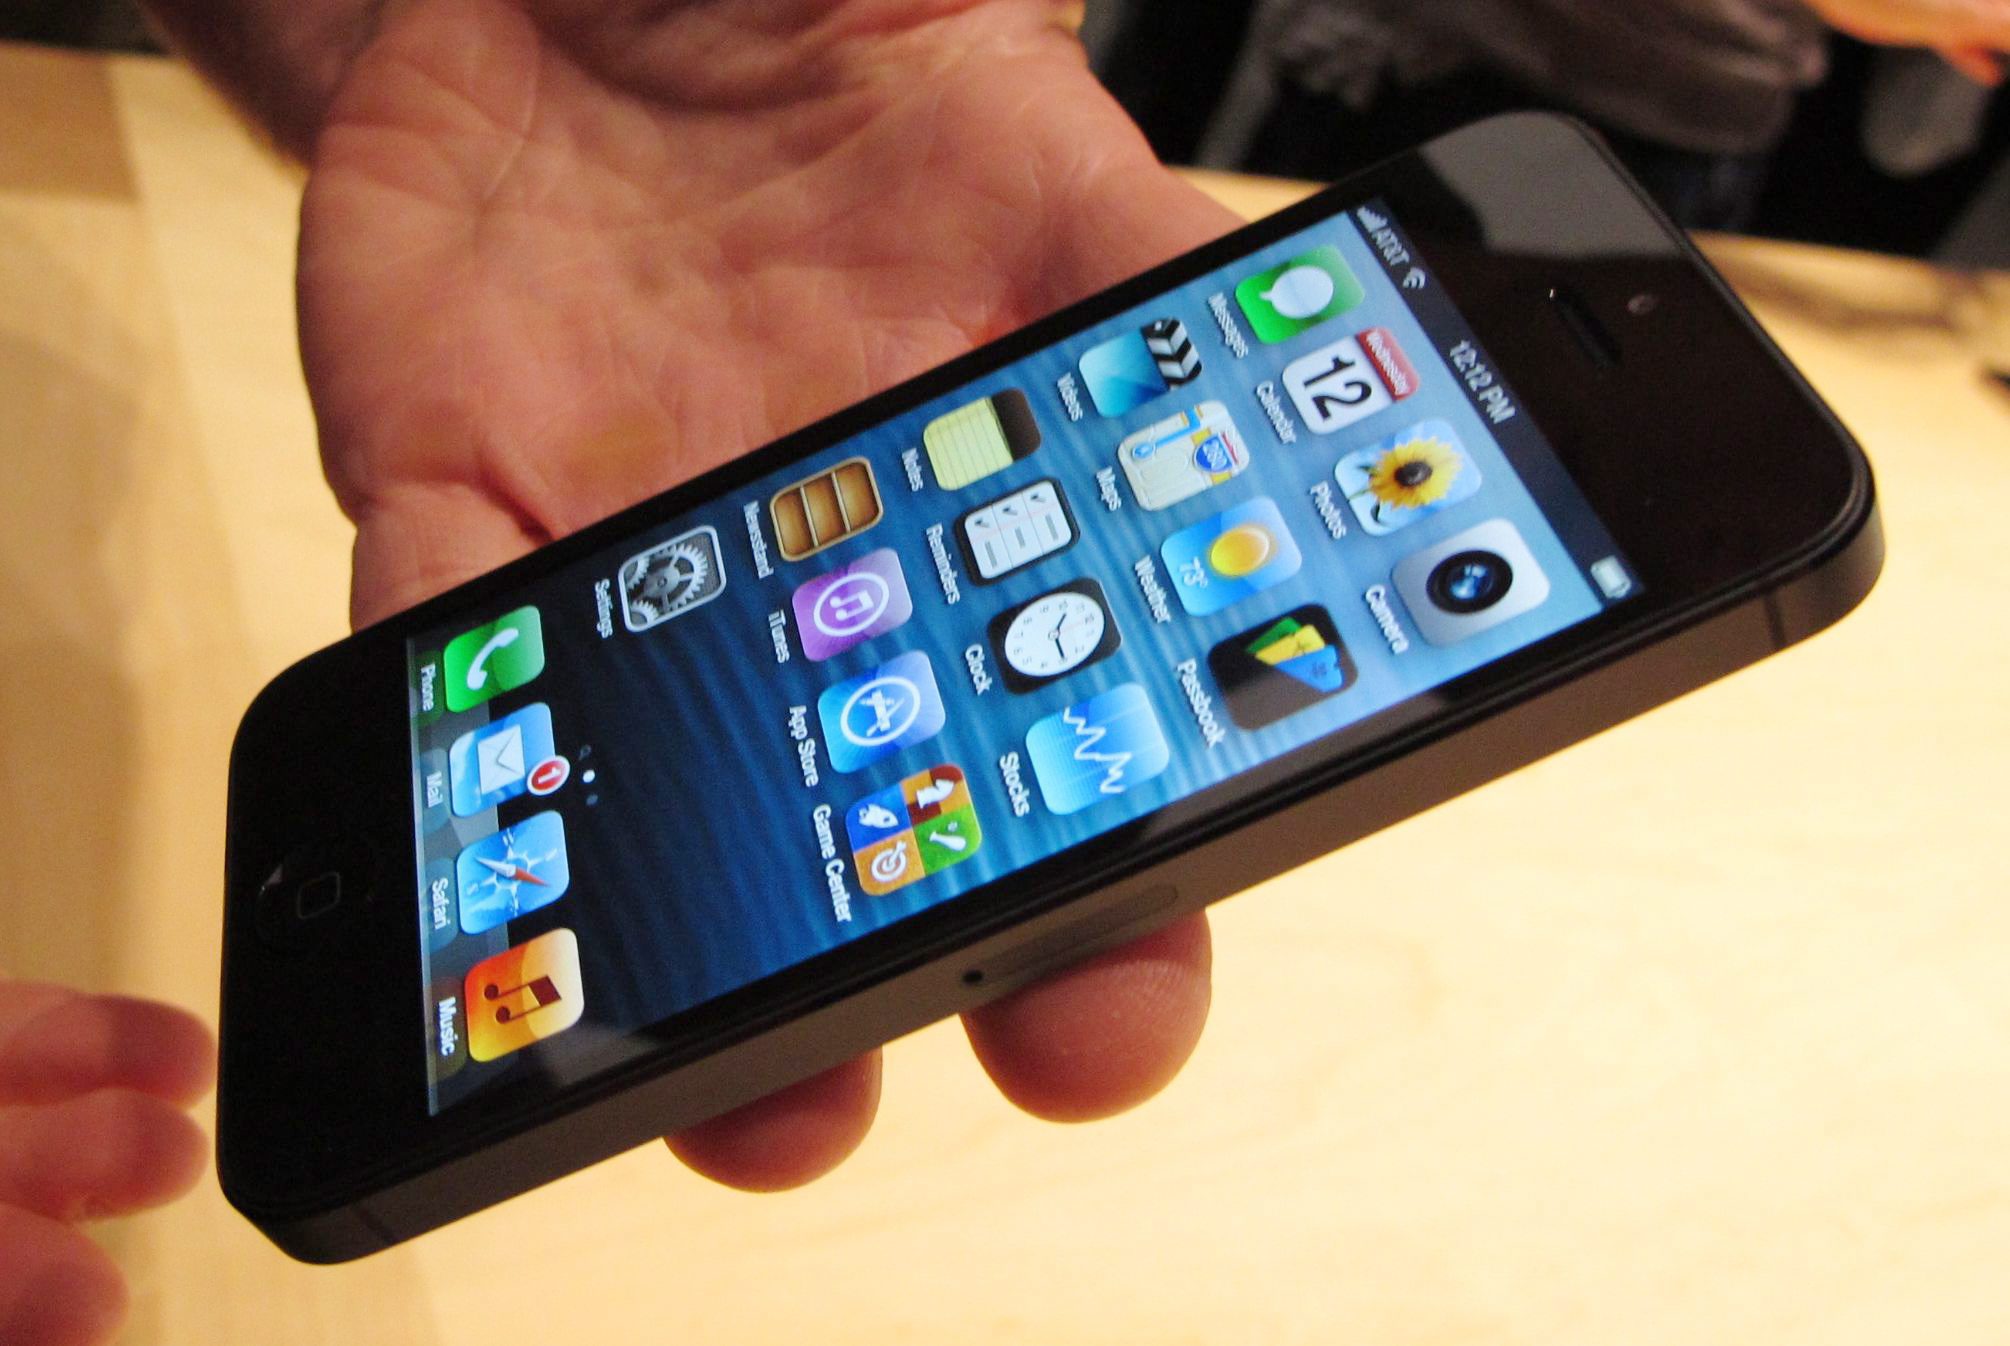 Apple iPhone 5 unveiled